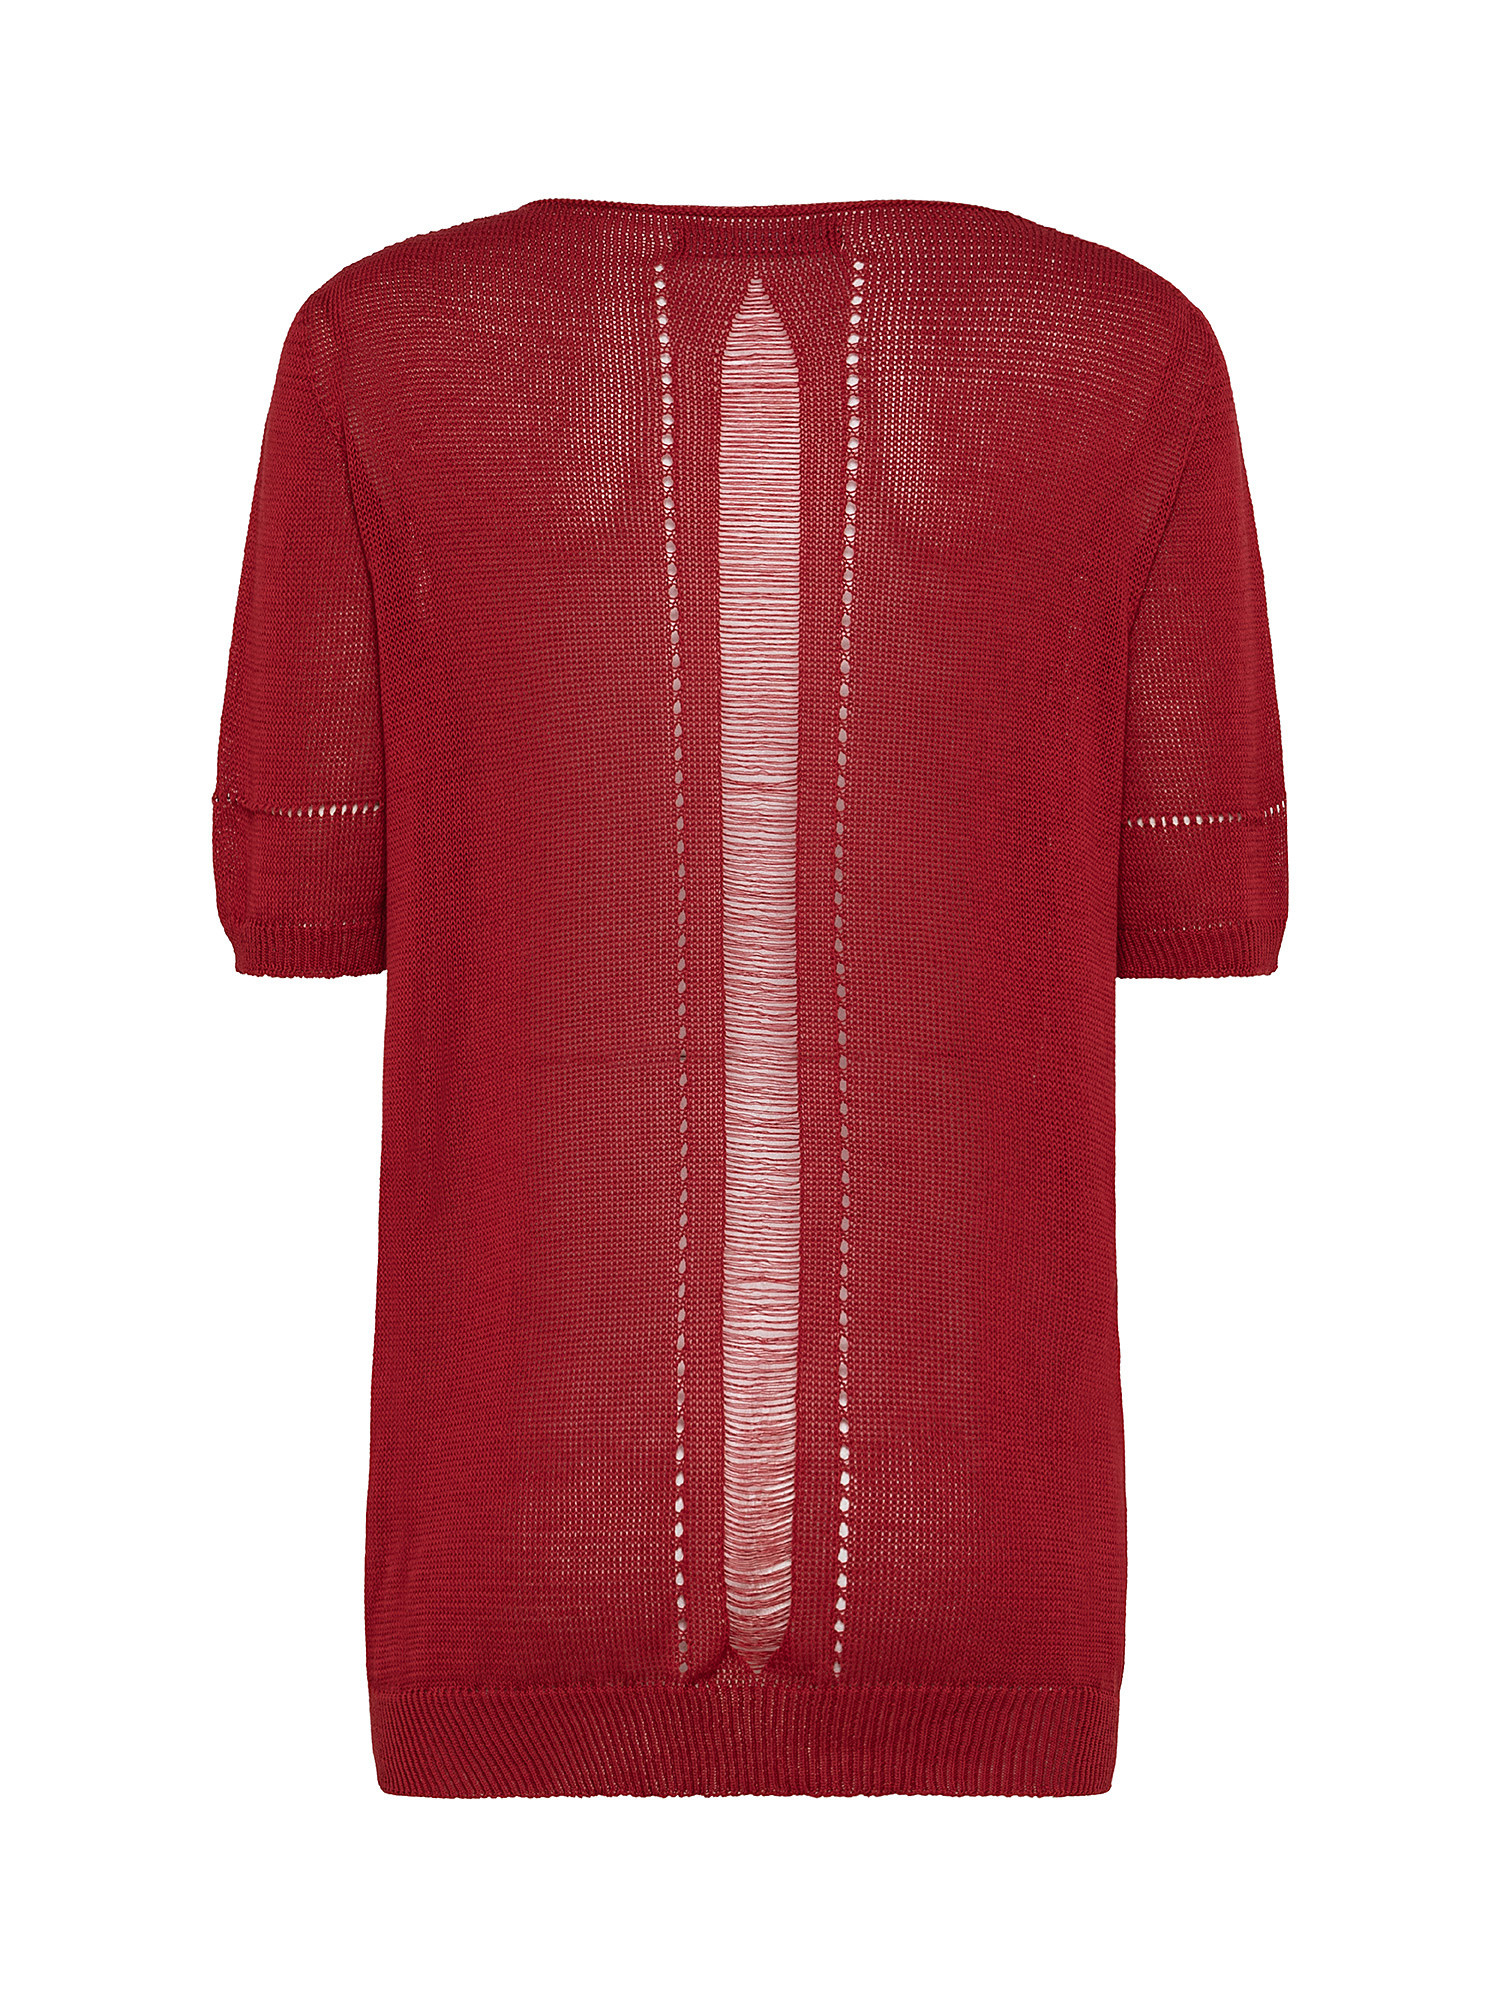 Maglia tricot, Rosso, large image number 1